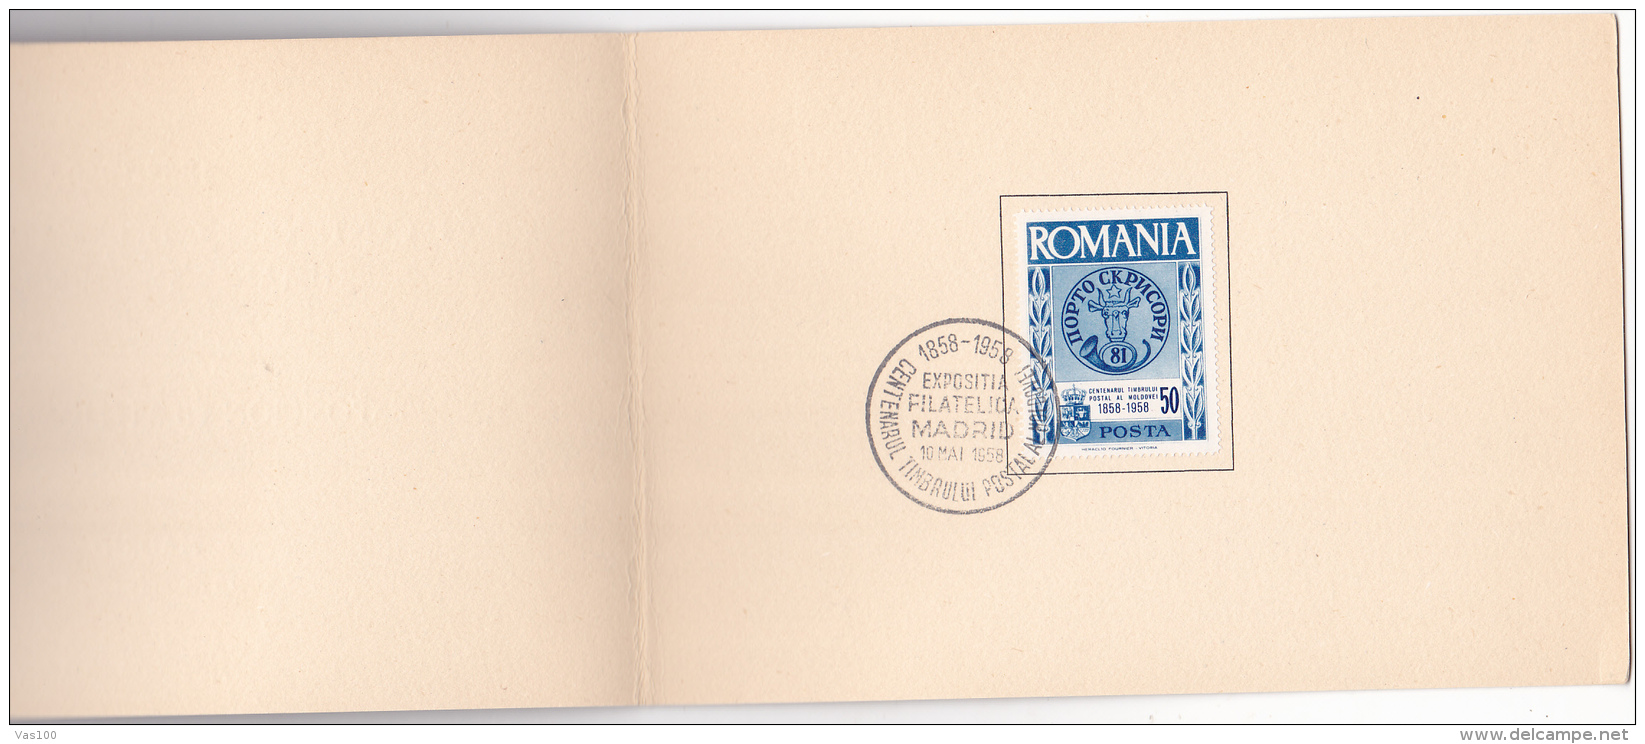 #T99     CENTENARY OF ROMANIAN STAMP FROM MOLDAVIA, ,    BOOKLETS,   1958  , SPAIN EXIL, ROMANIA. - Carnets